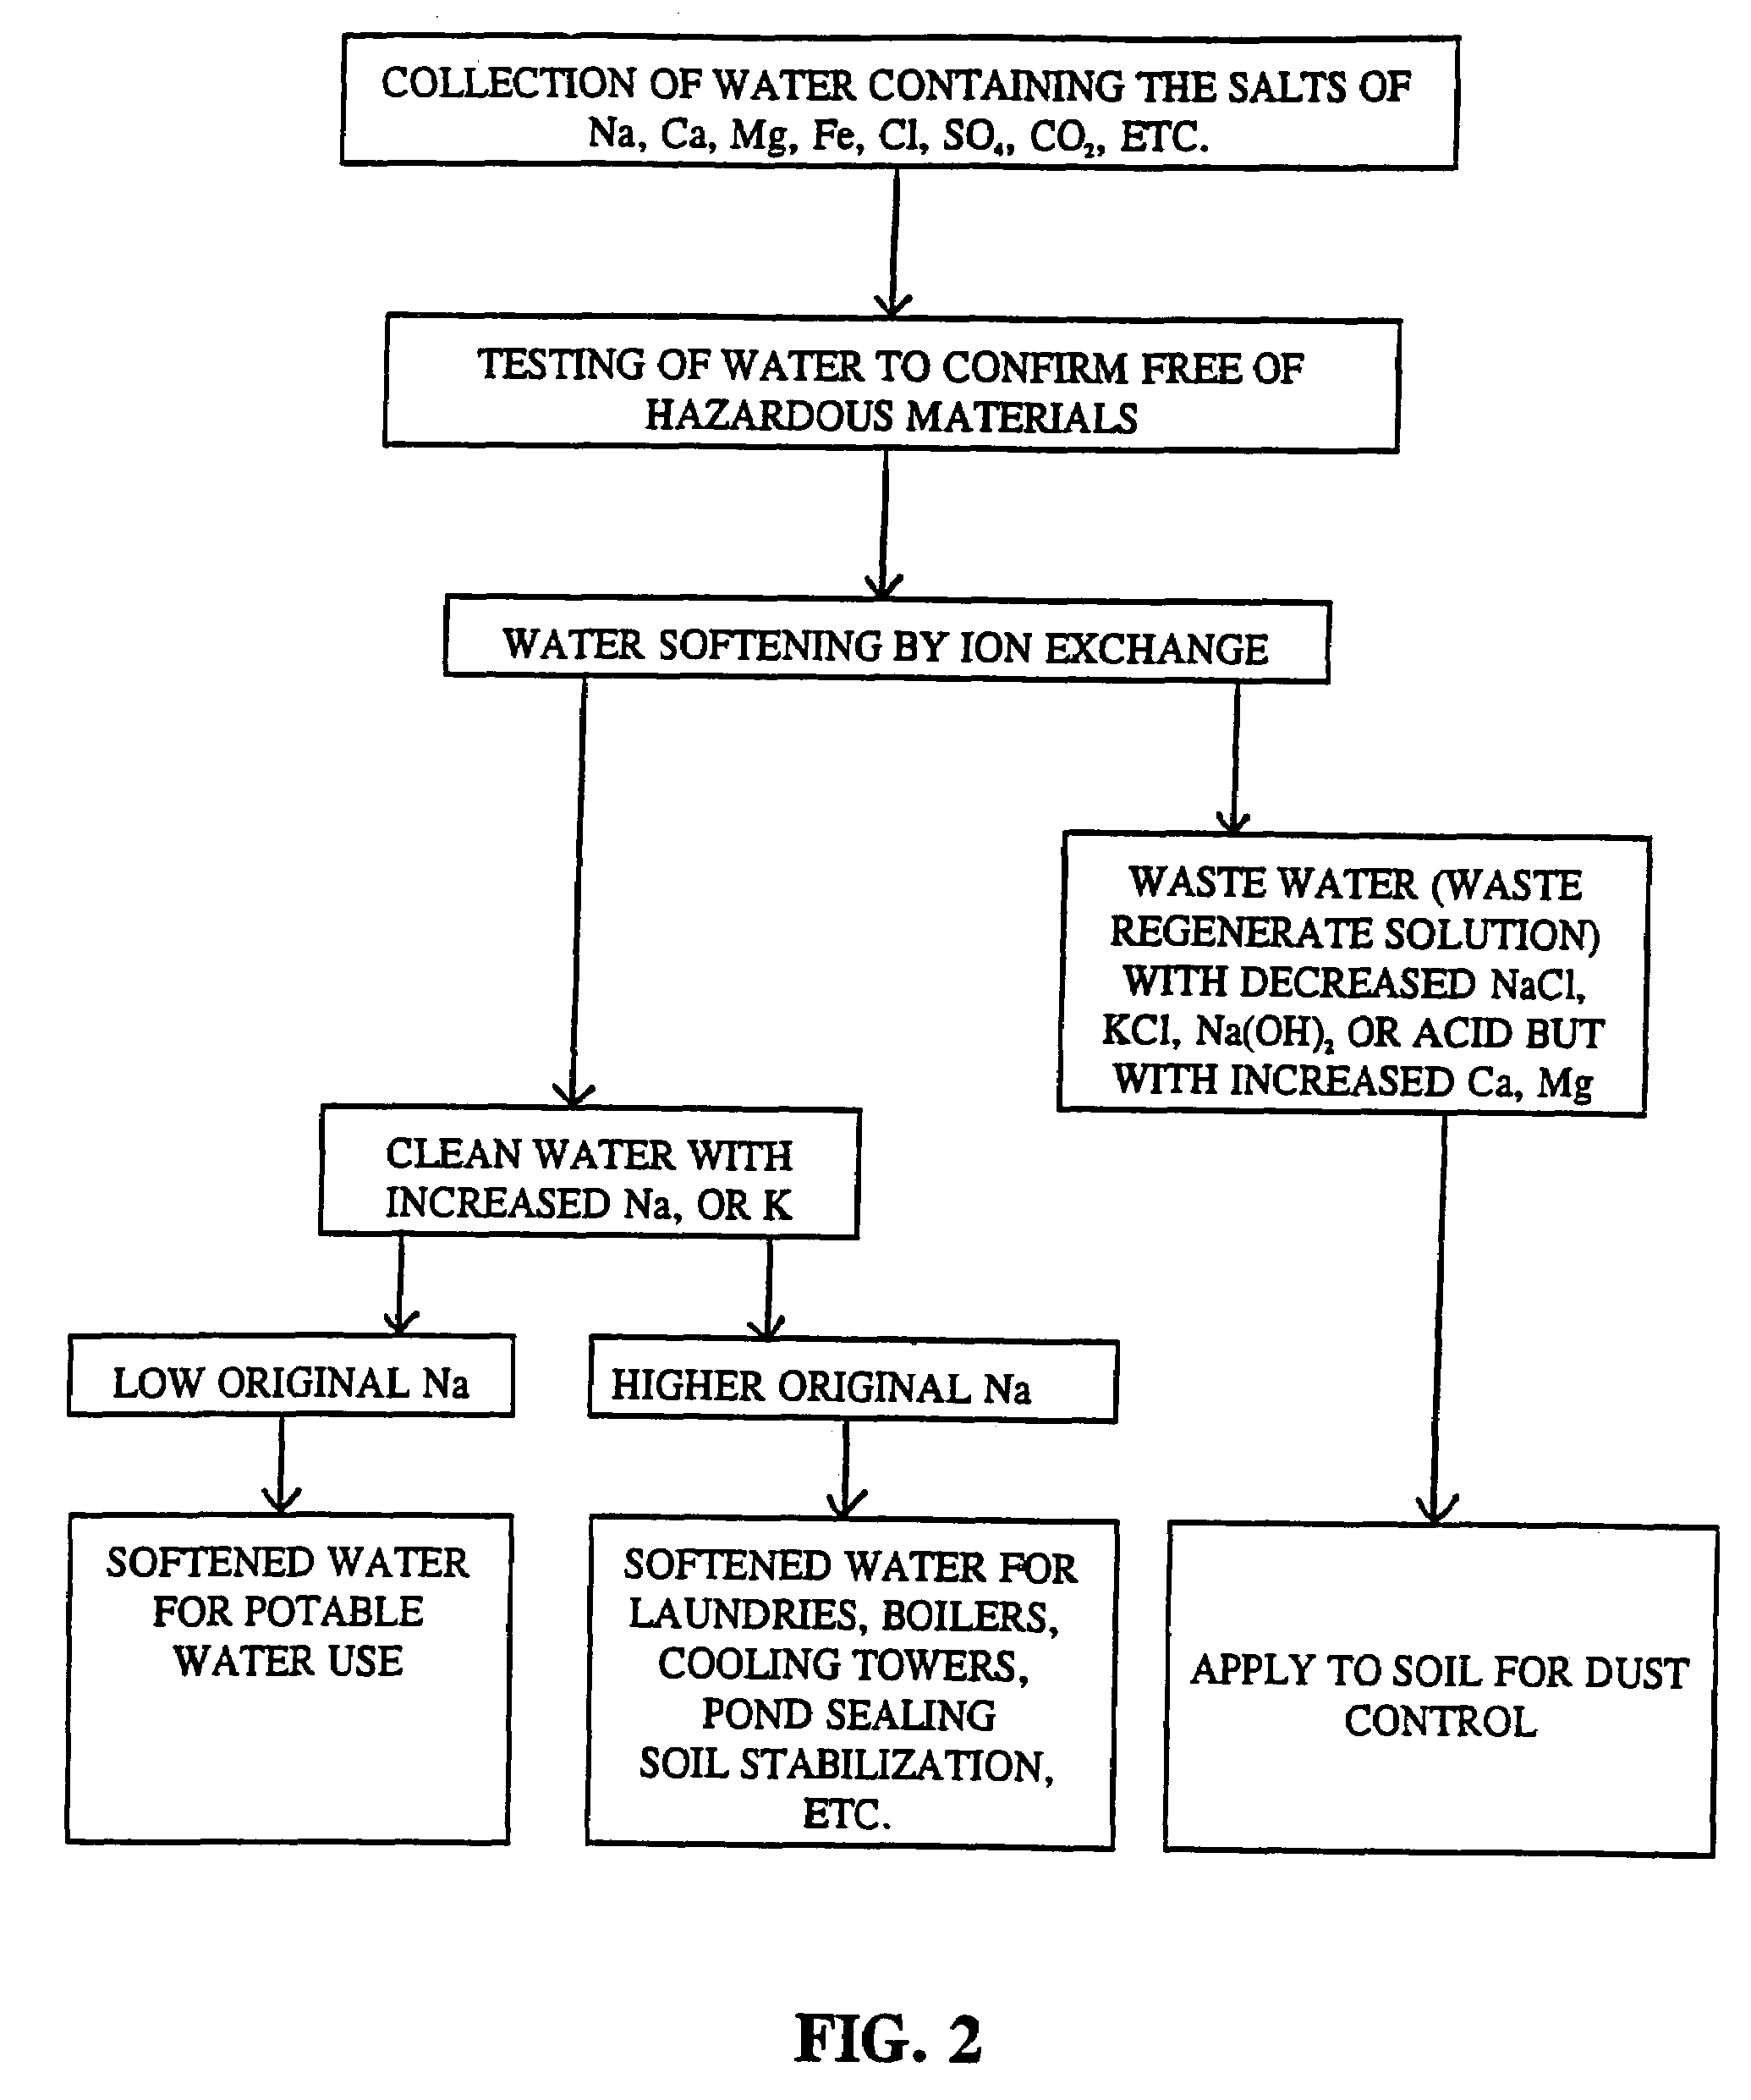 Methods of utilizing waste waters produced by water purification processing